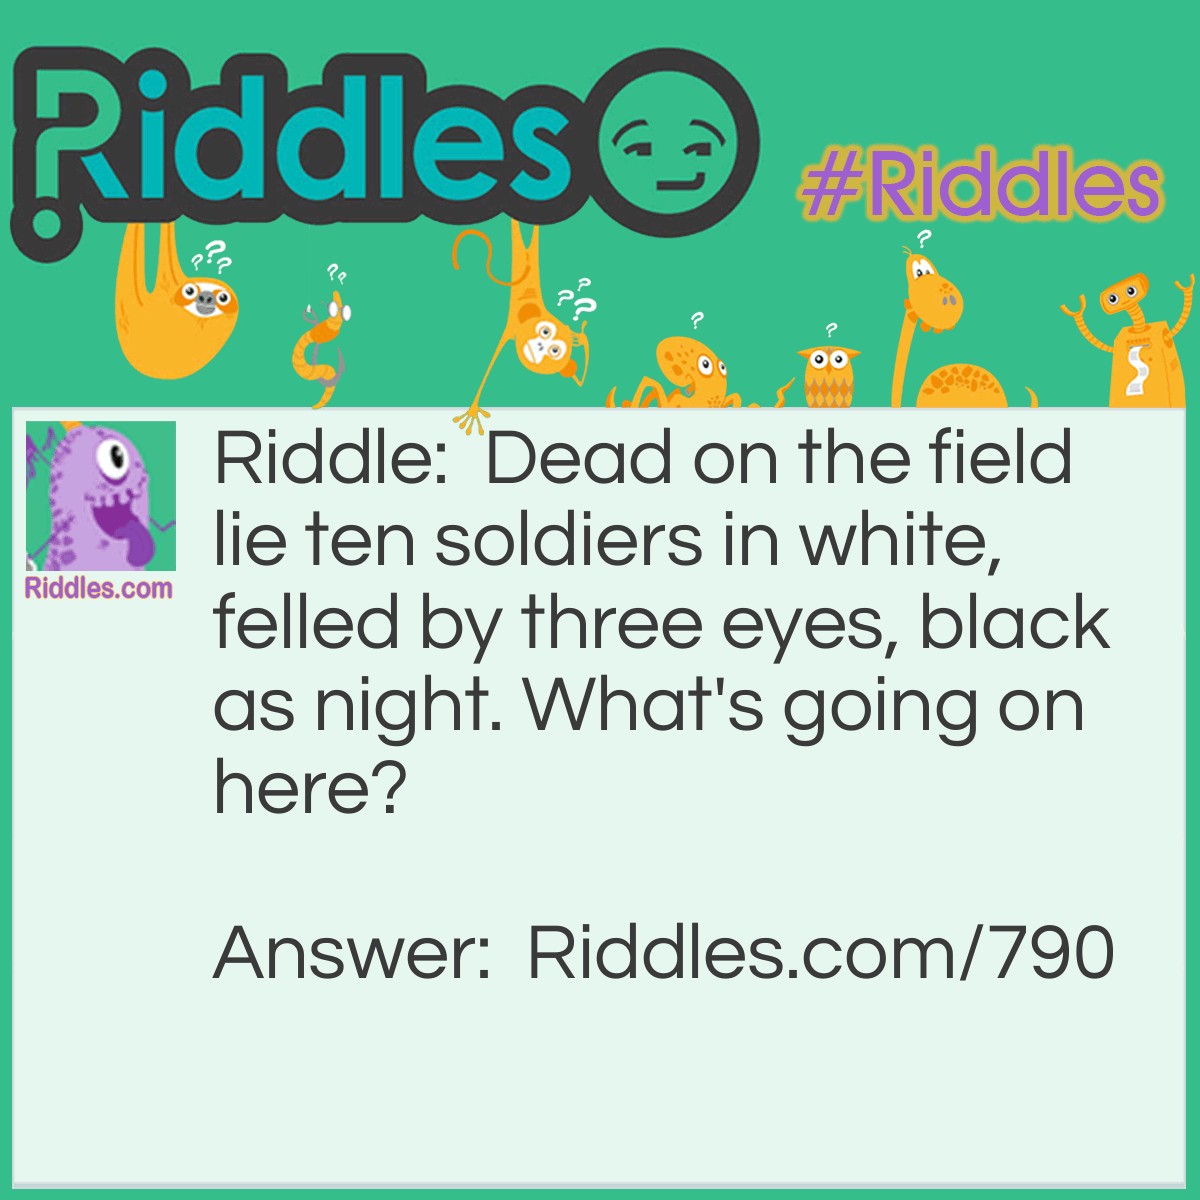 Riddle: Dead on the field lie ten soldiers in white, felled by three eyes, black as night. What's going on here? Answer: A strike was thrown in ten pin bowling.